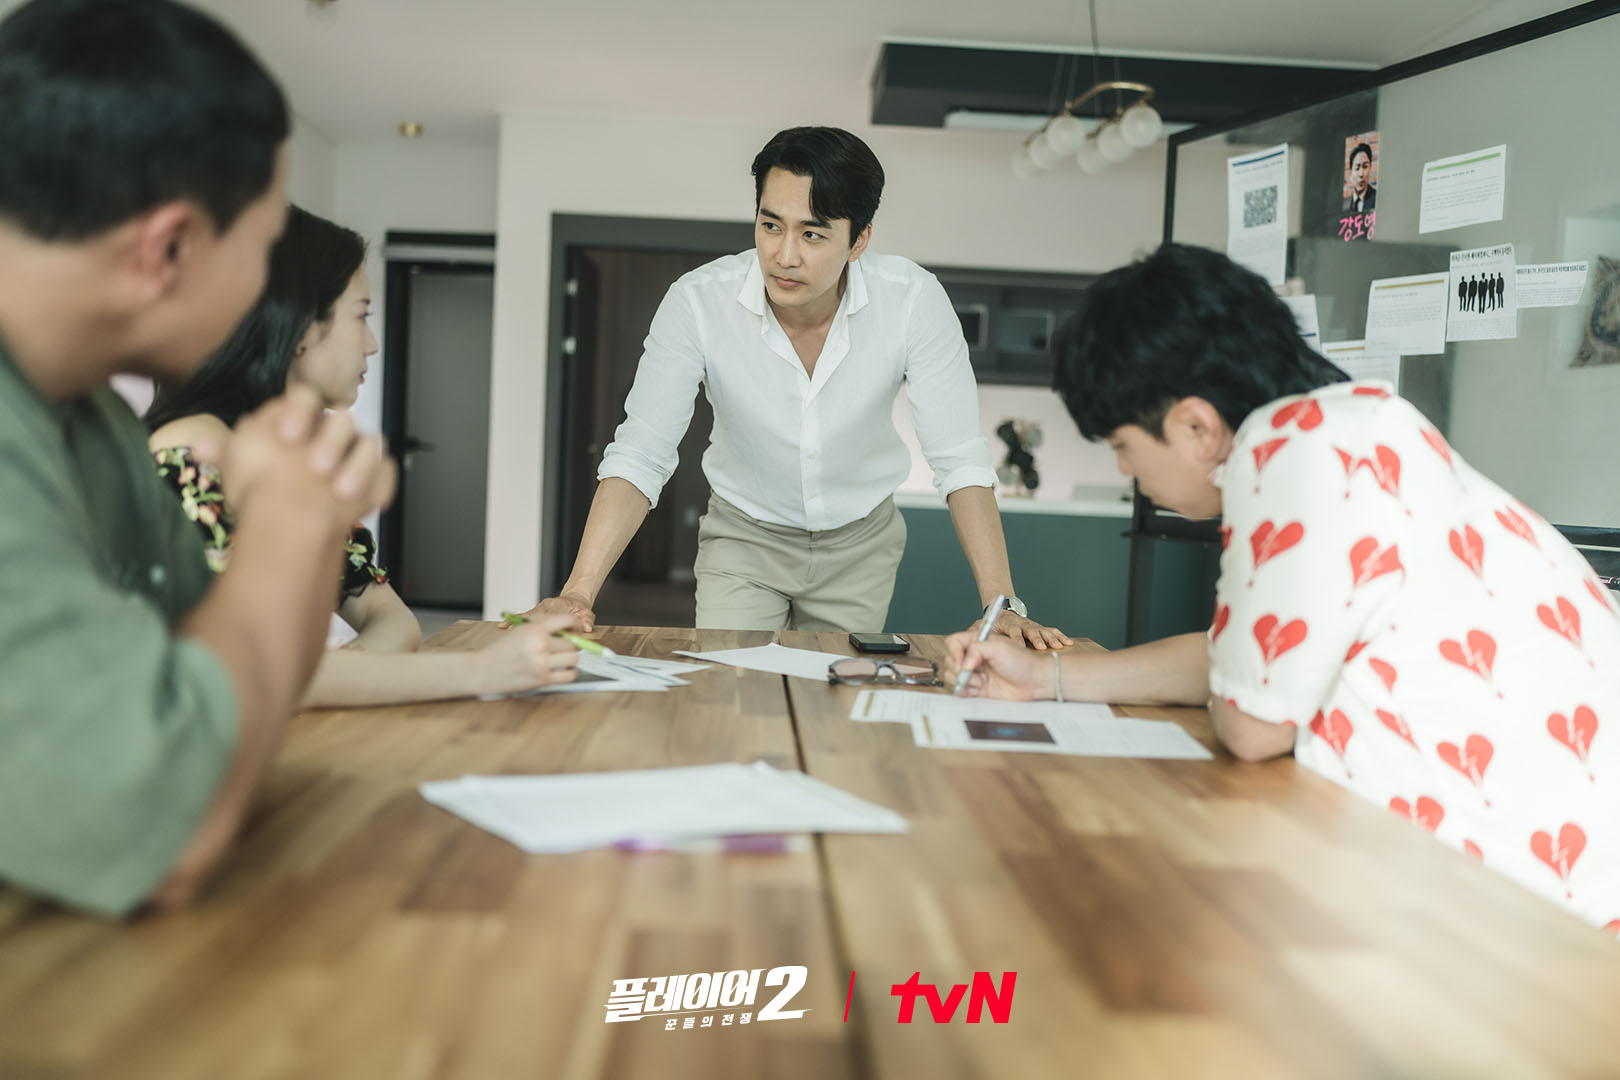 Song Seung Heon, Lee Si Eon, Tae Won Suk, And Jang Gyuri Show Unmatched Chemistry In 